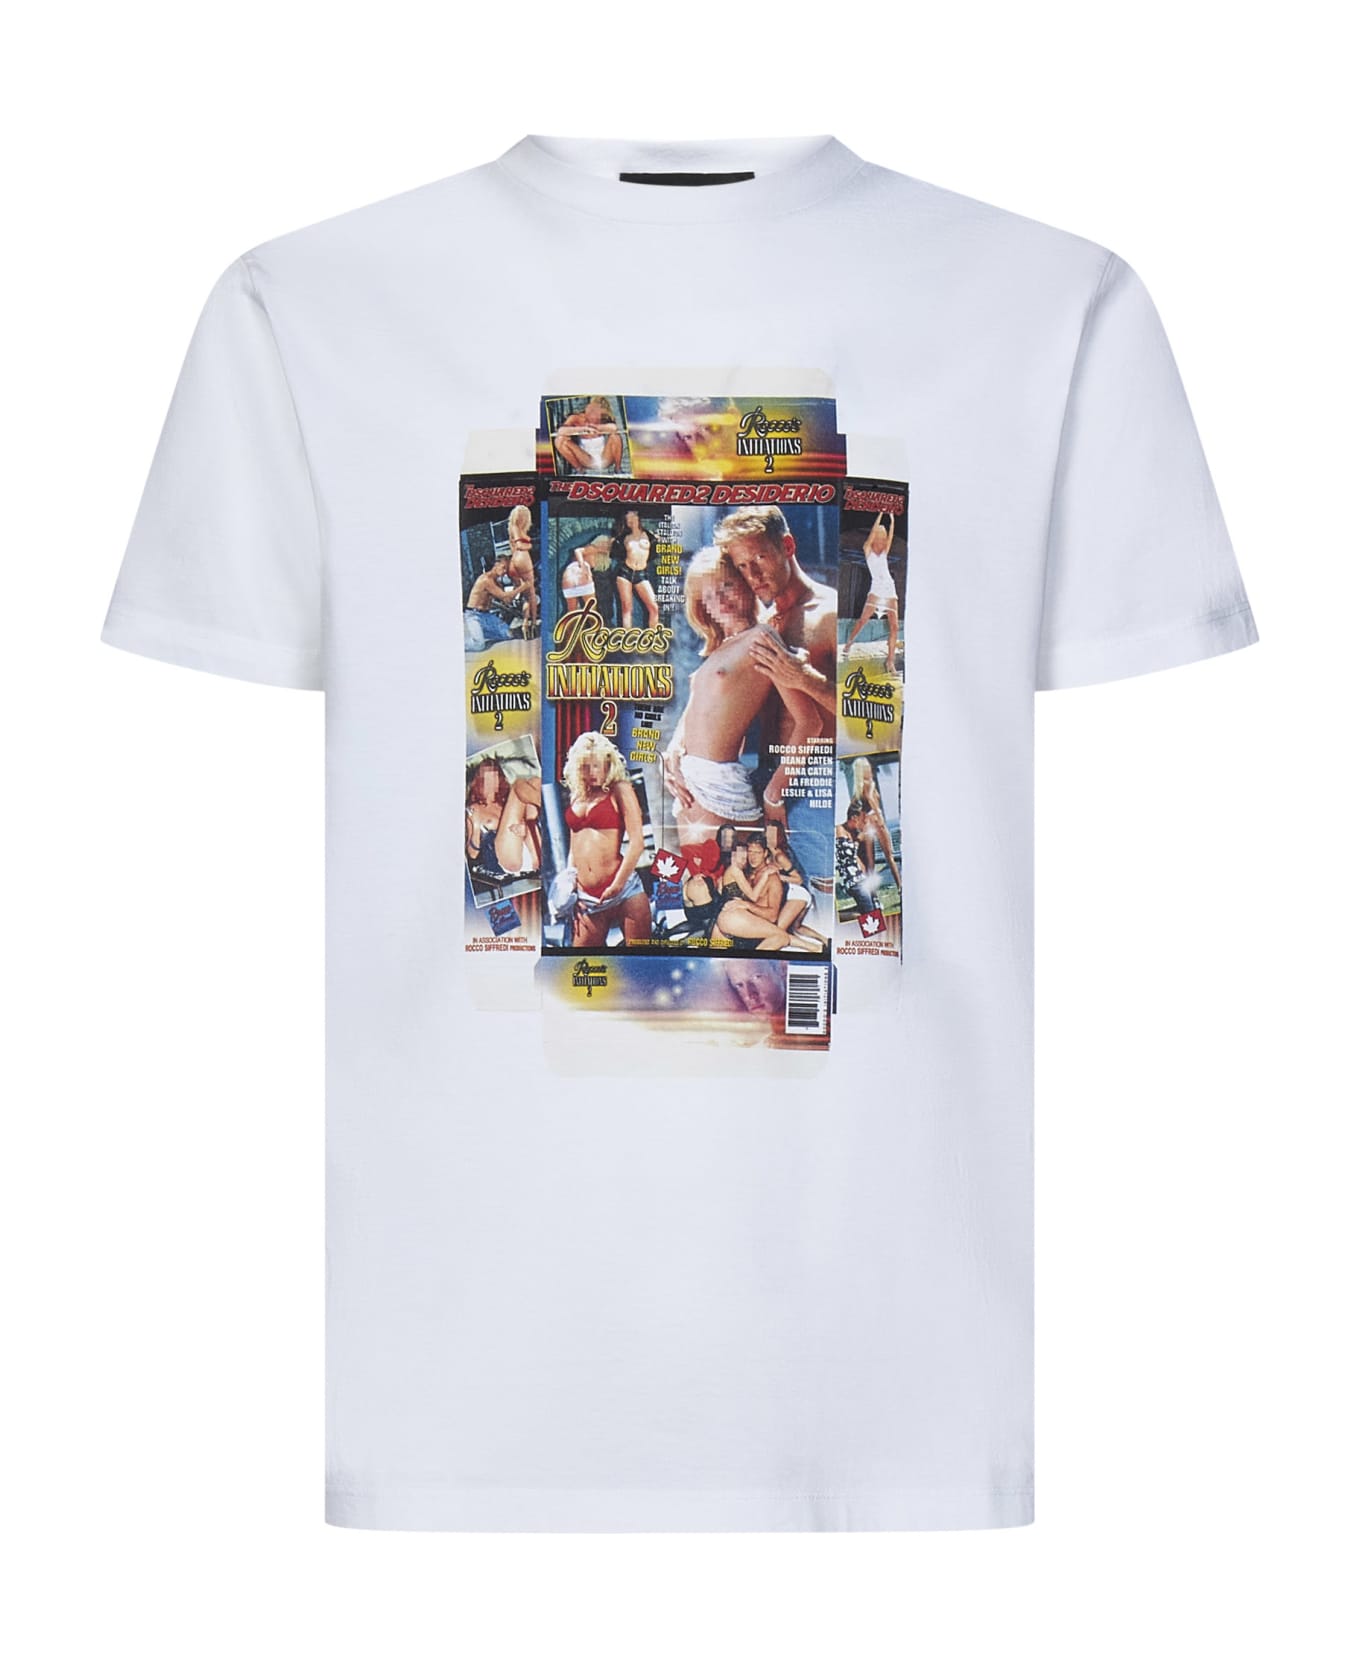 Dsquared2 Rocco Cool Fit T-shirt - White